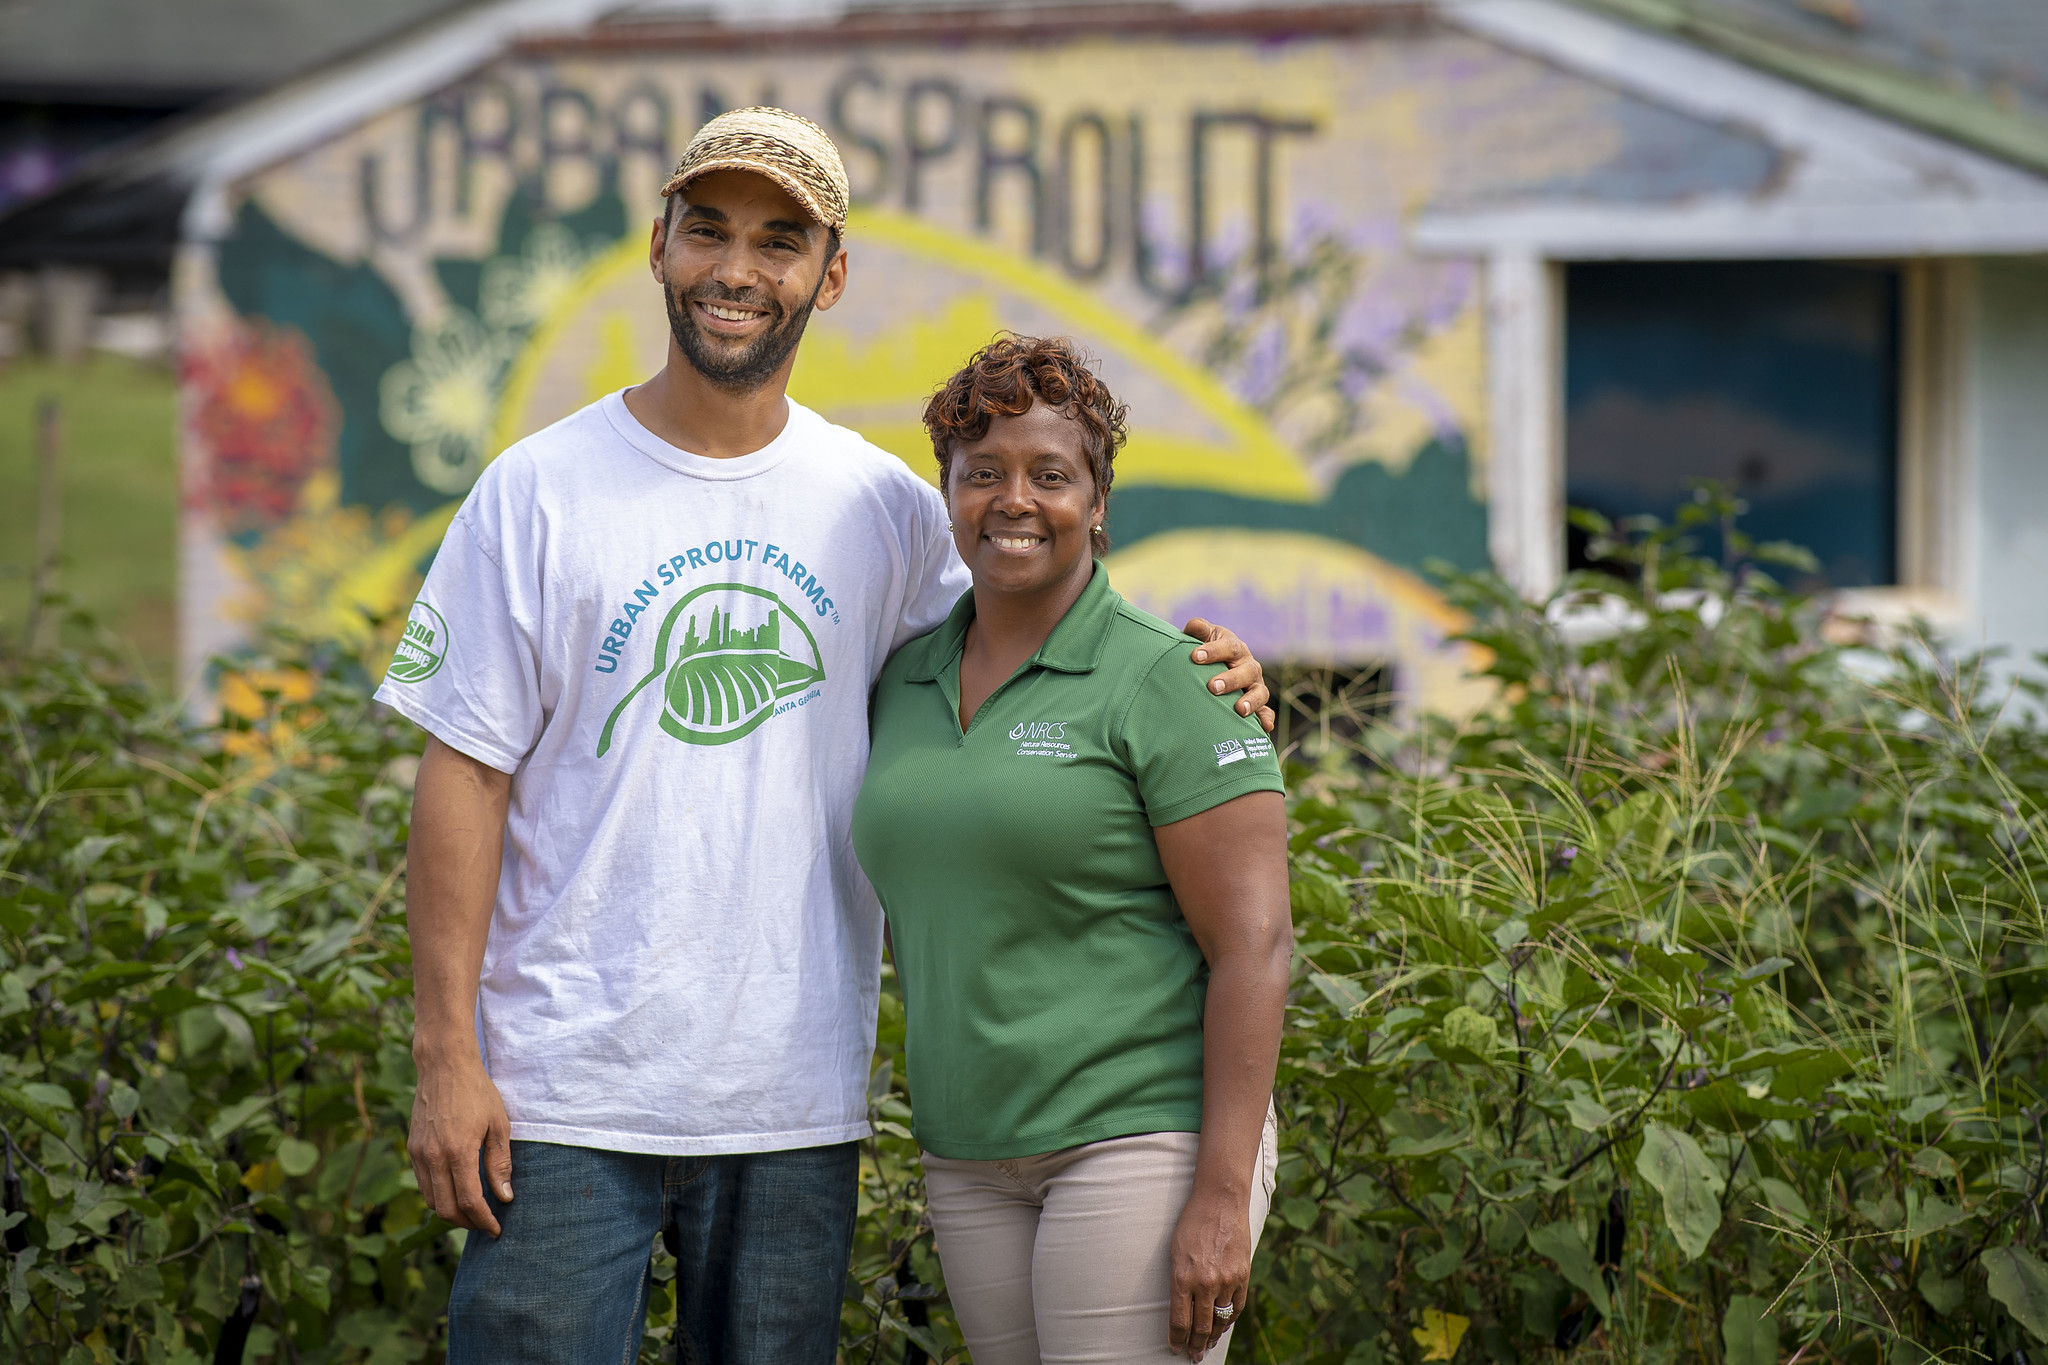 A USDA employee and organic farmer with a shirt that says "Urban Sprout Farms" stands in front of a farm.